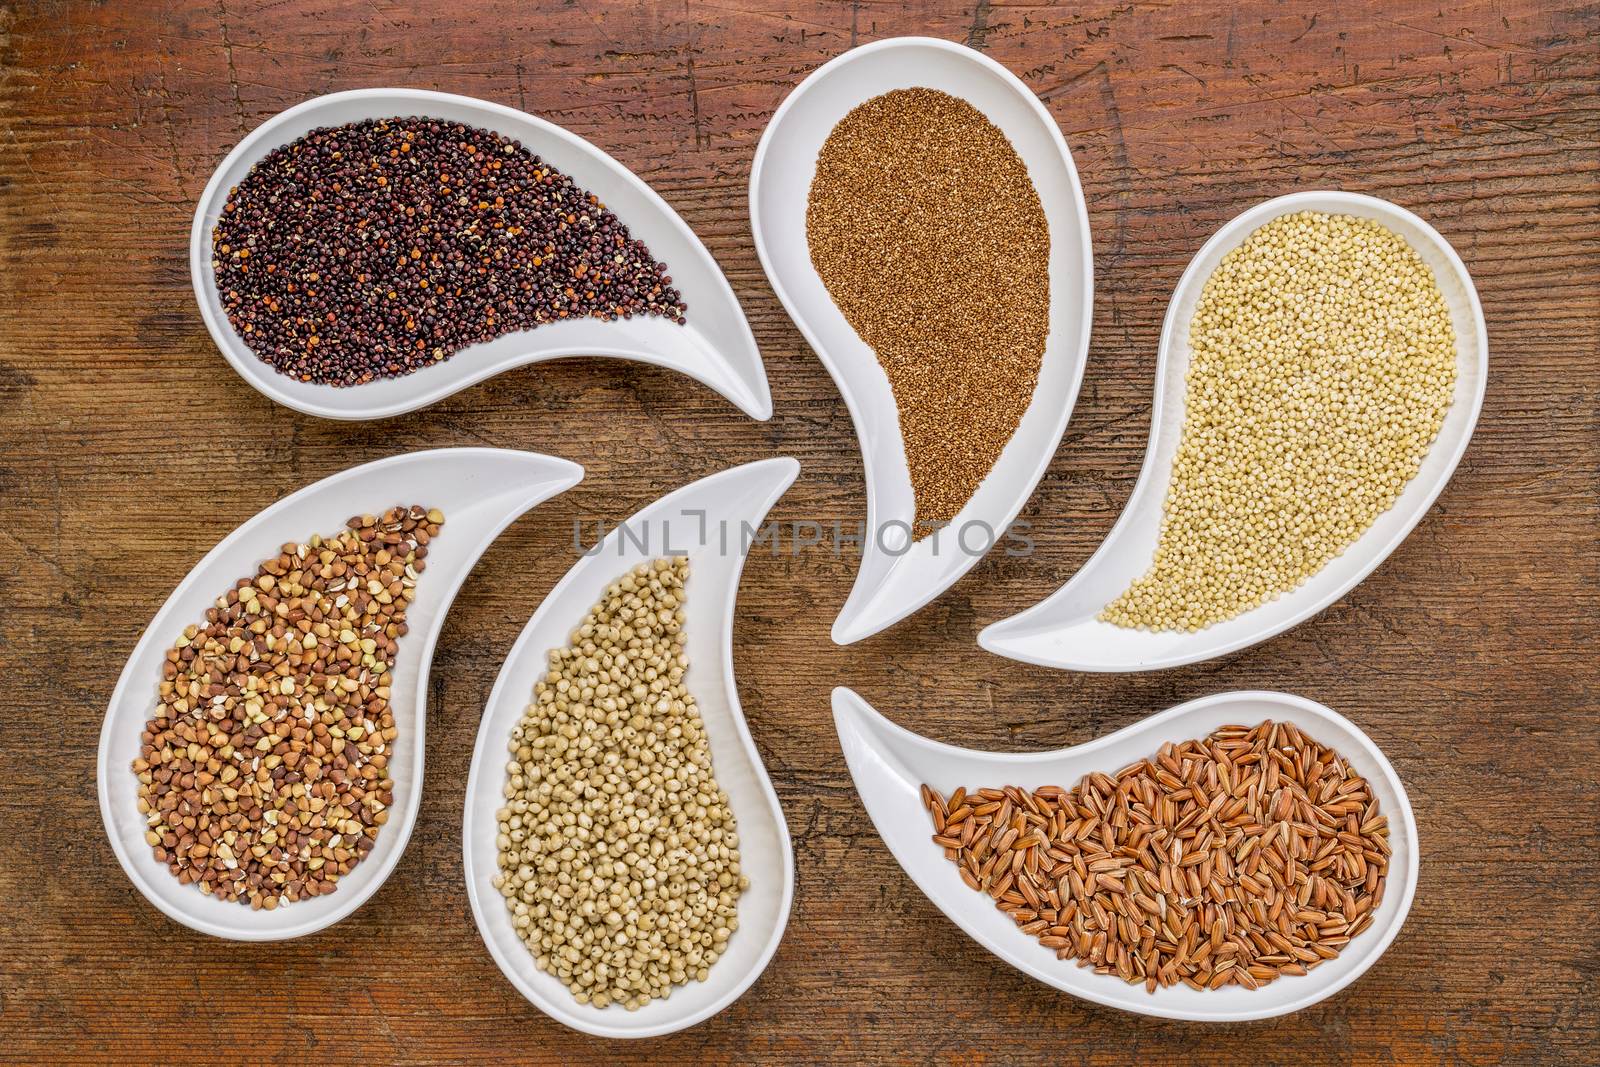 gluten free grain abstract - top view of teardrop shaped bowls with quinoa, teff, millet, rice, sorghum and buckwheat grains against grunge wood